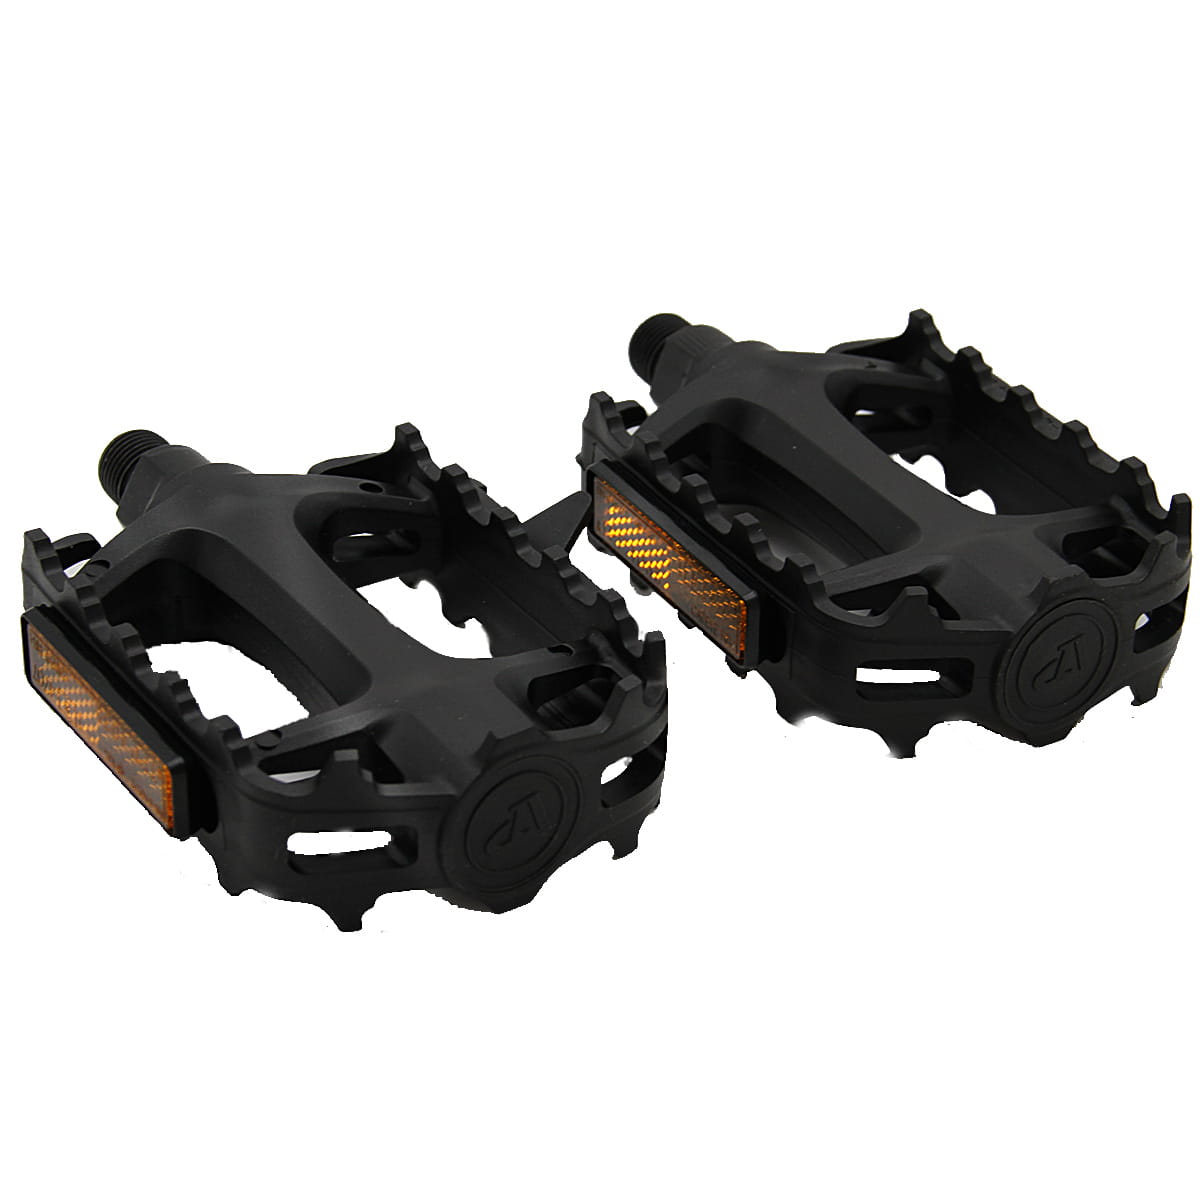 vp bicycle pedals